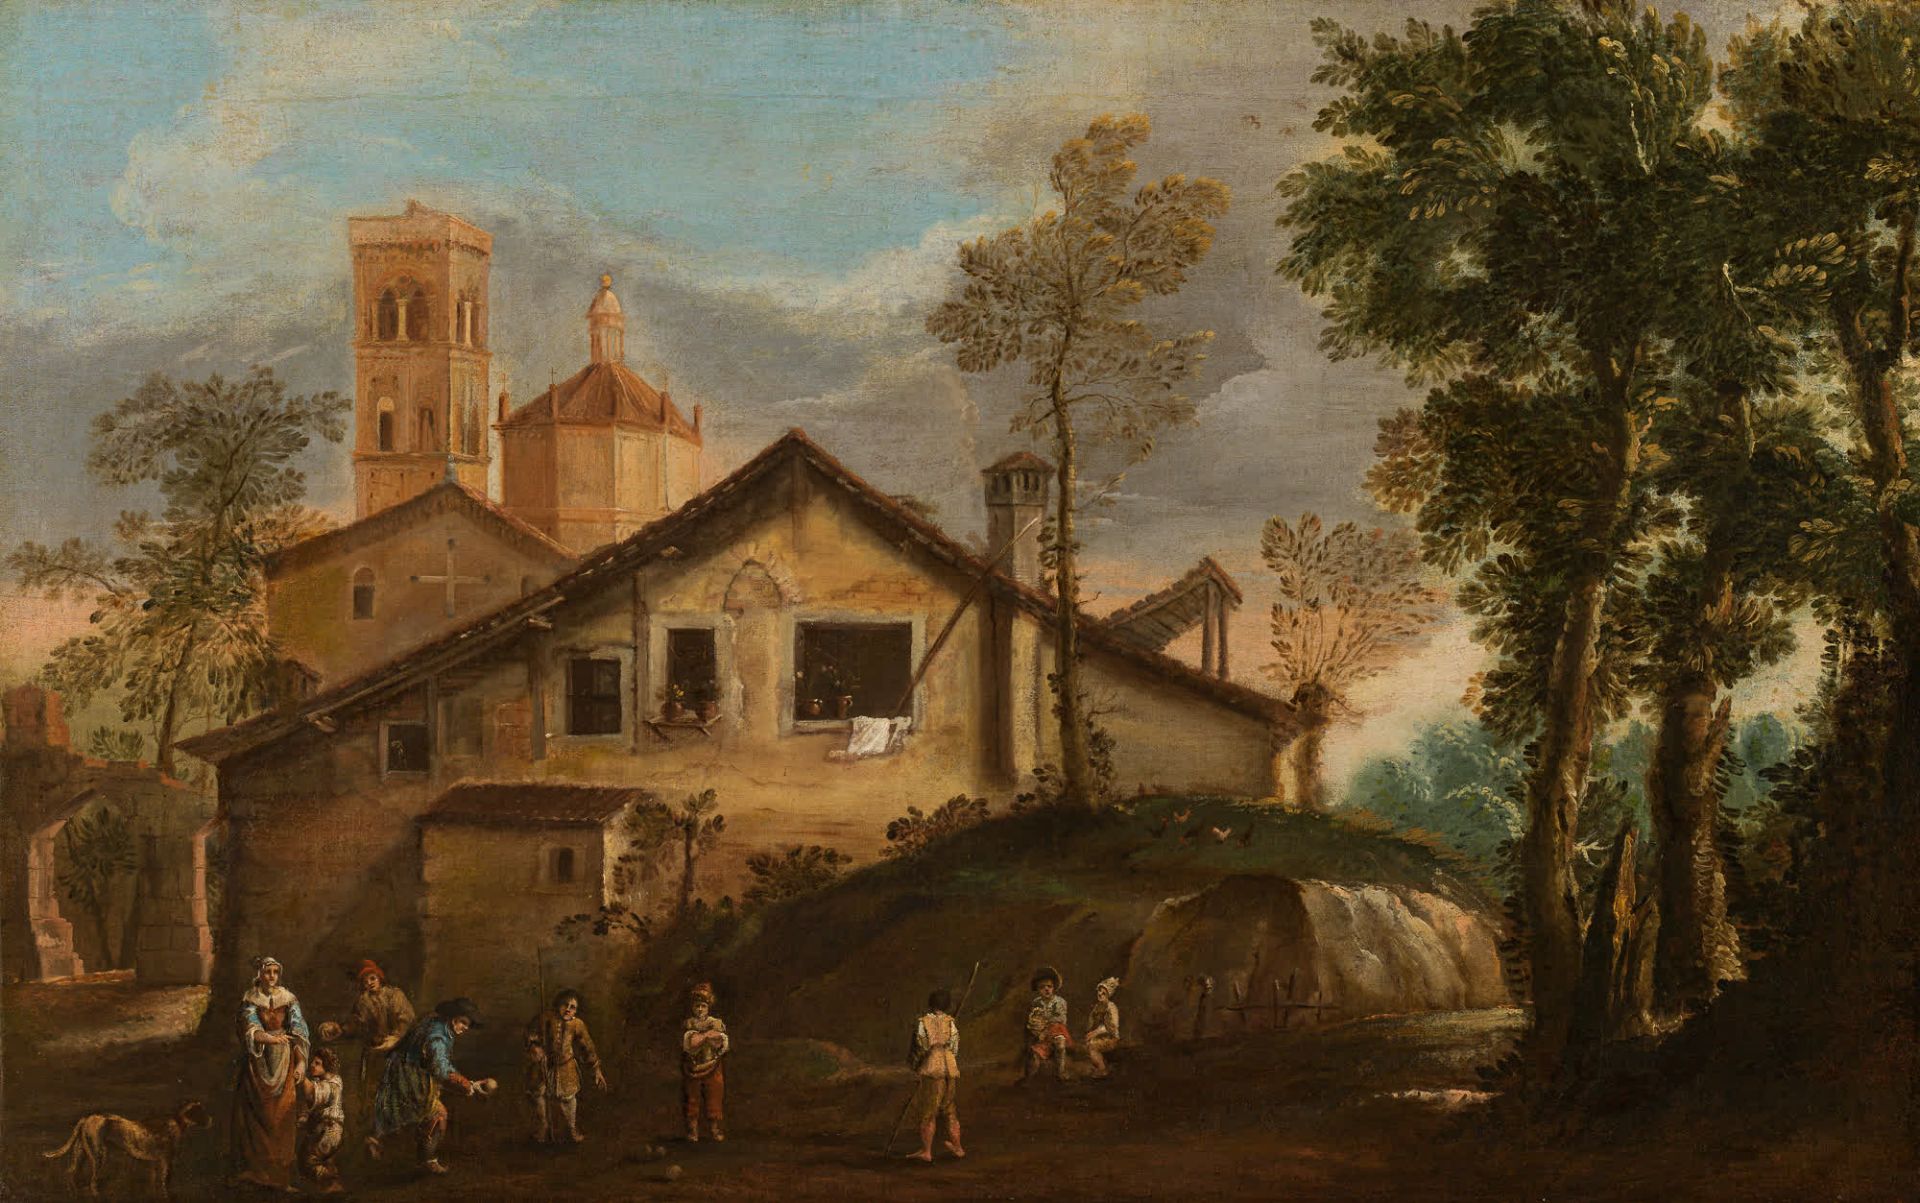 Venetian School: Boccia players in front of a village